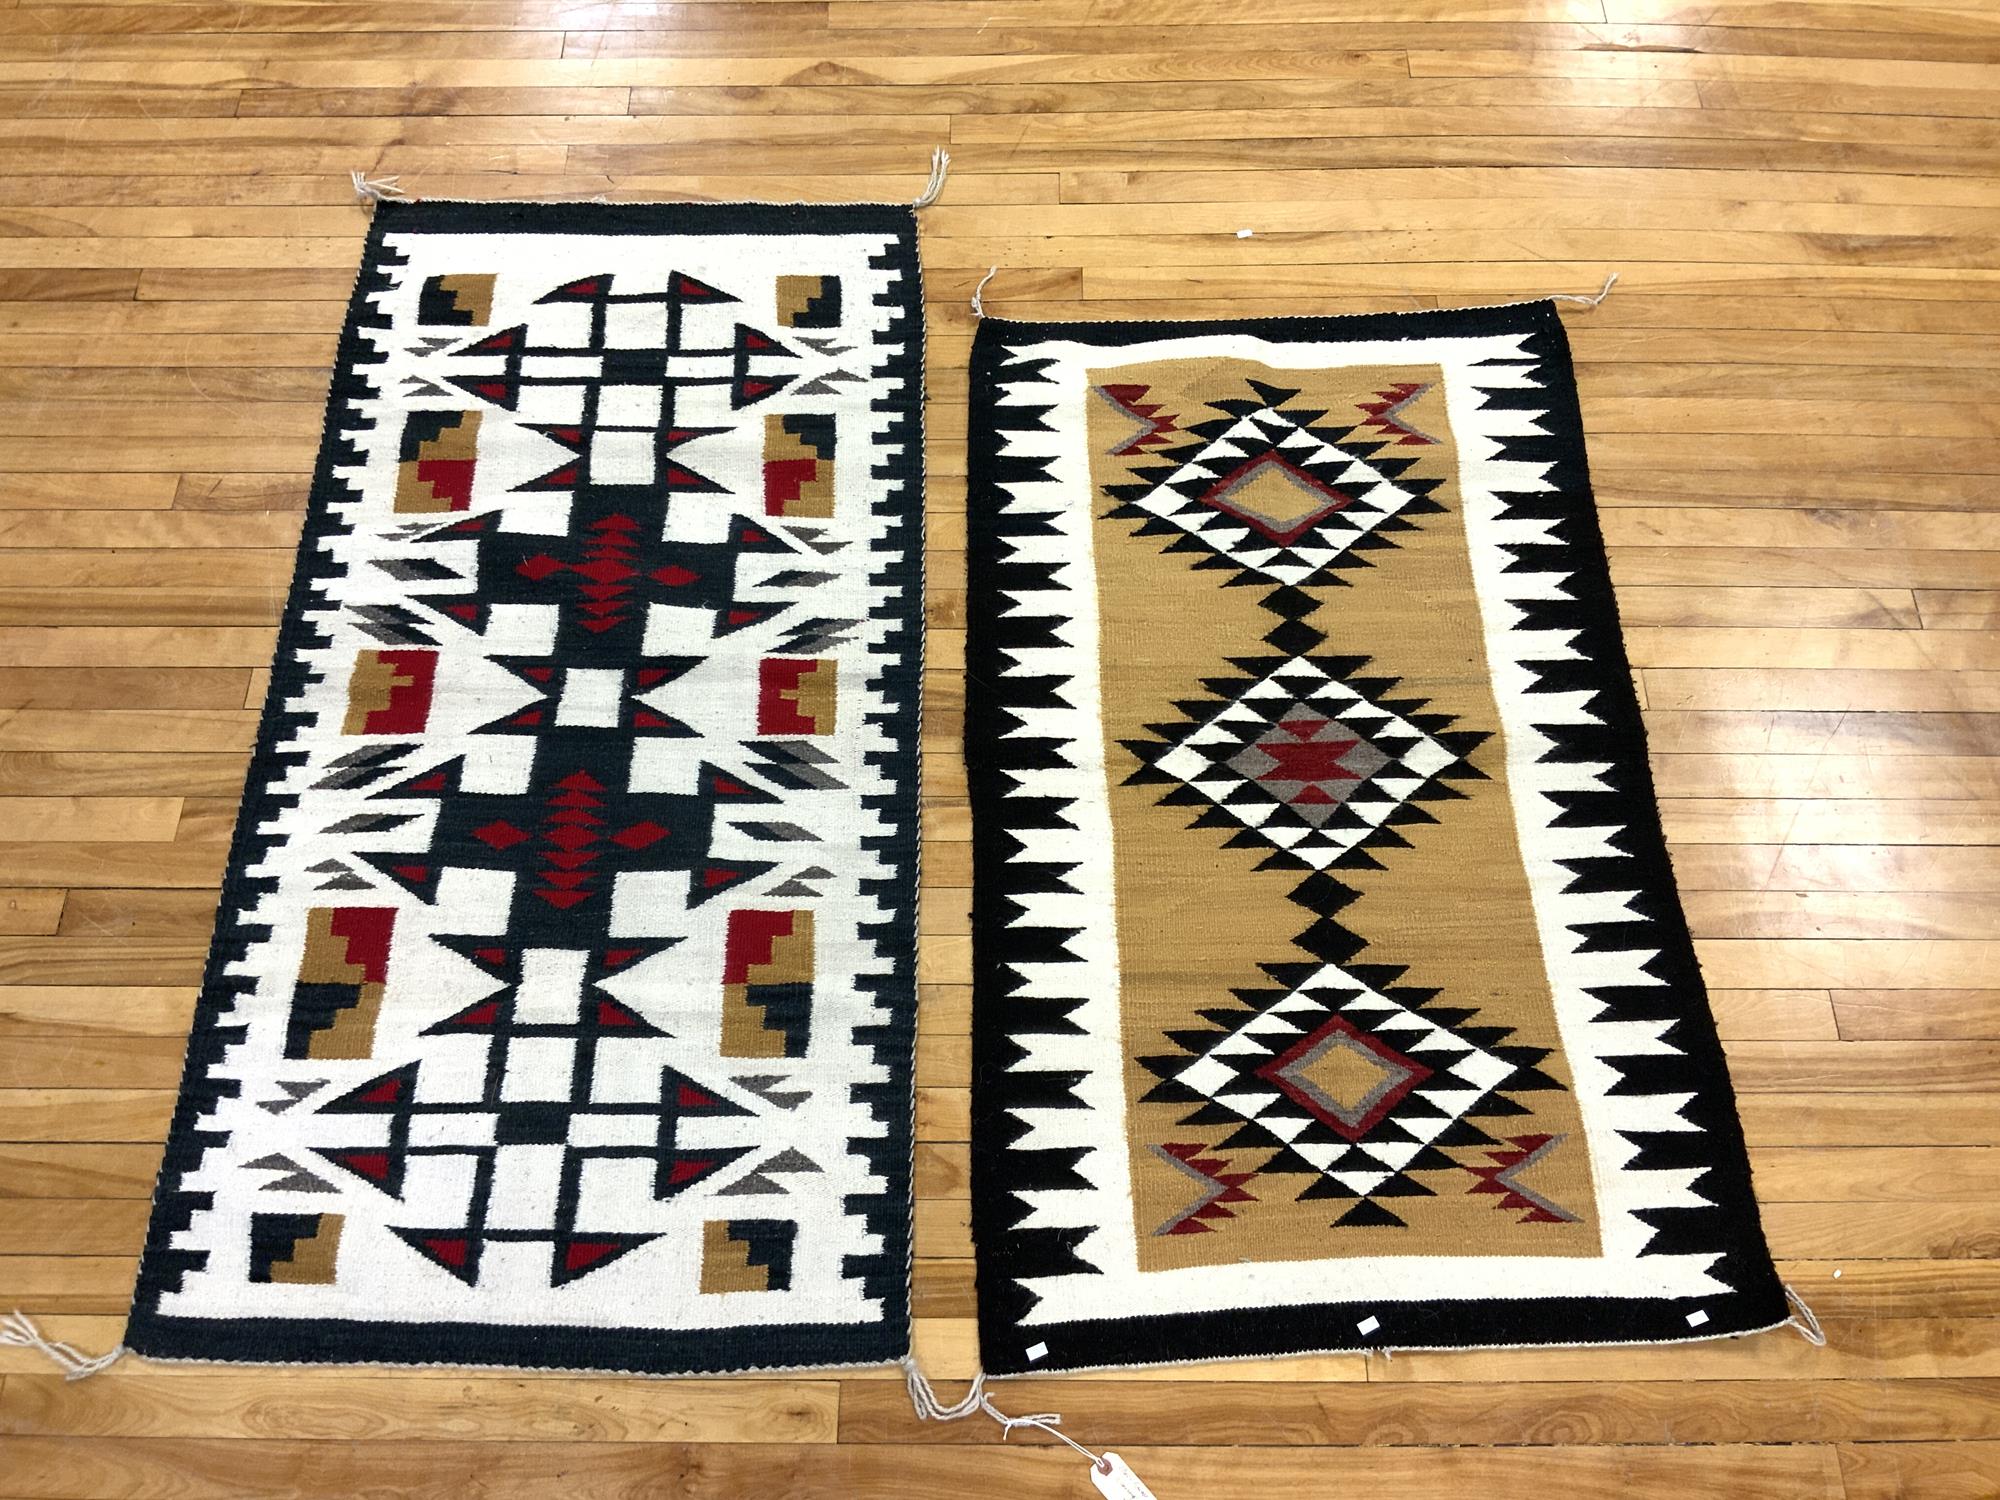 TWO 20TH C. NAVAJO RUGS. Both have